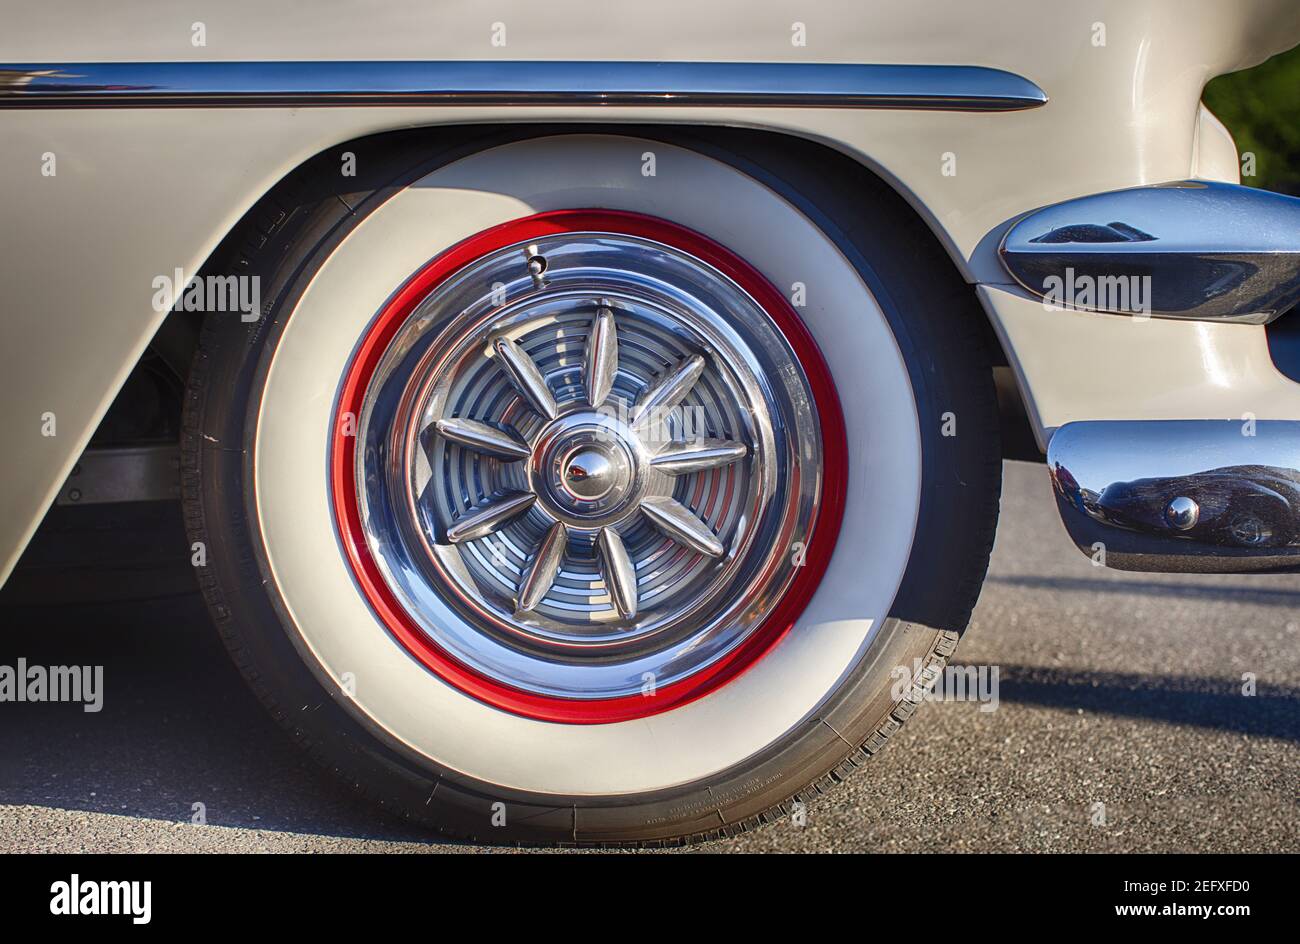 Close Up view of a Classic American Car's wheel with a whitewall tire. Stock Photo